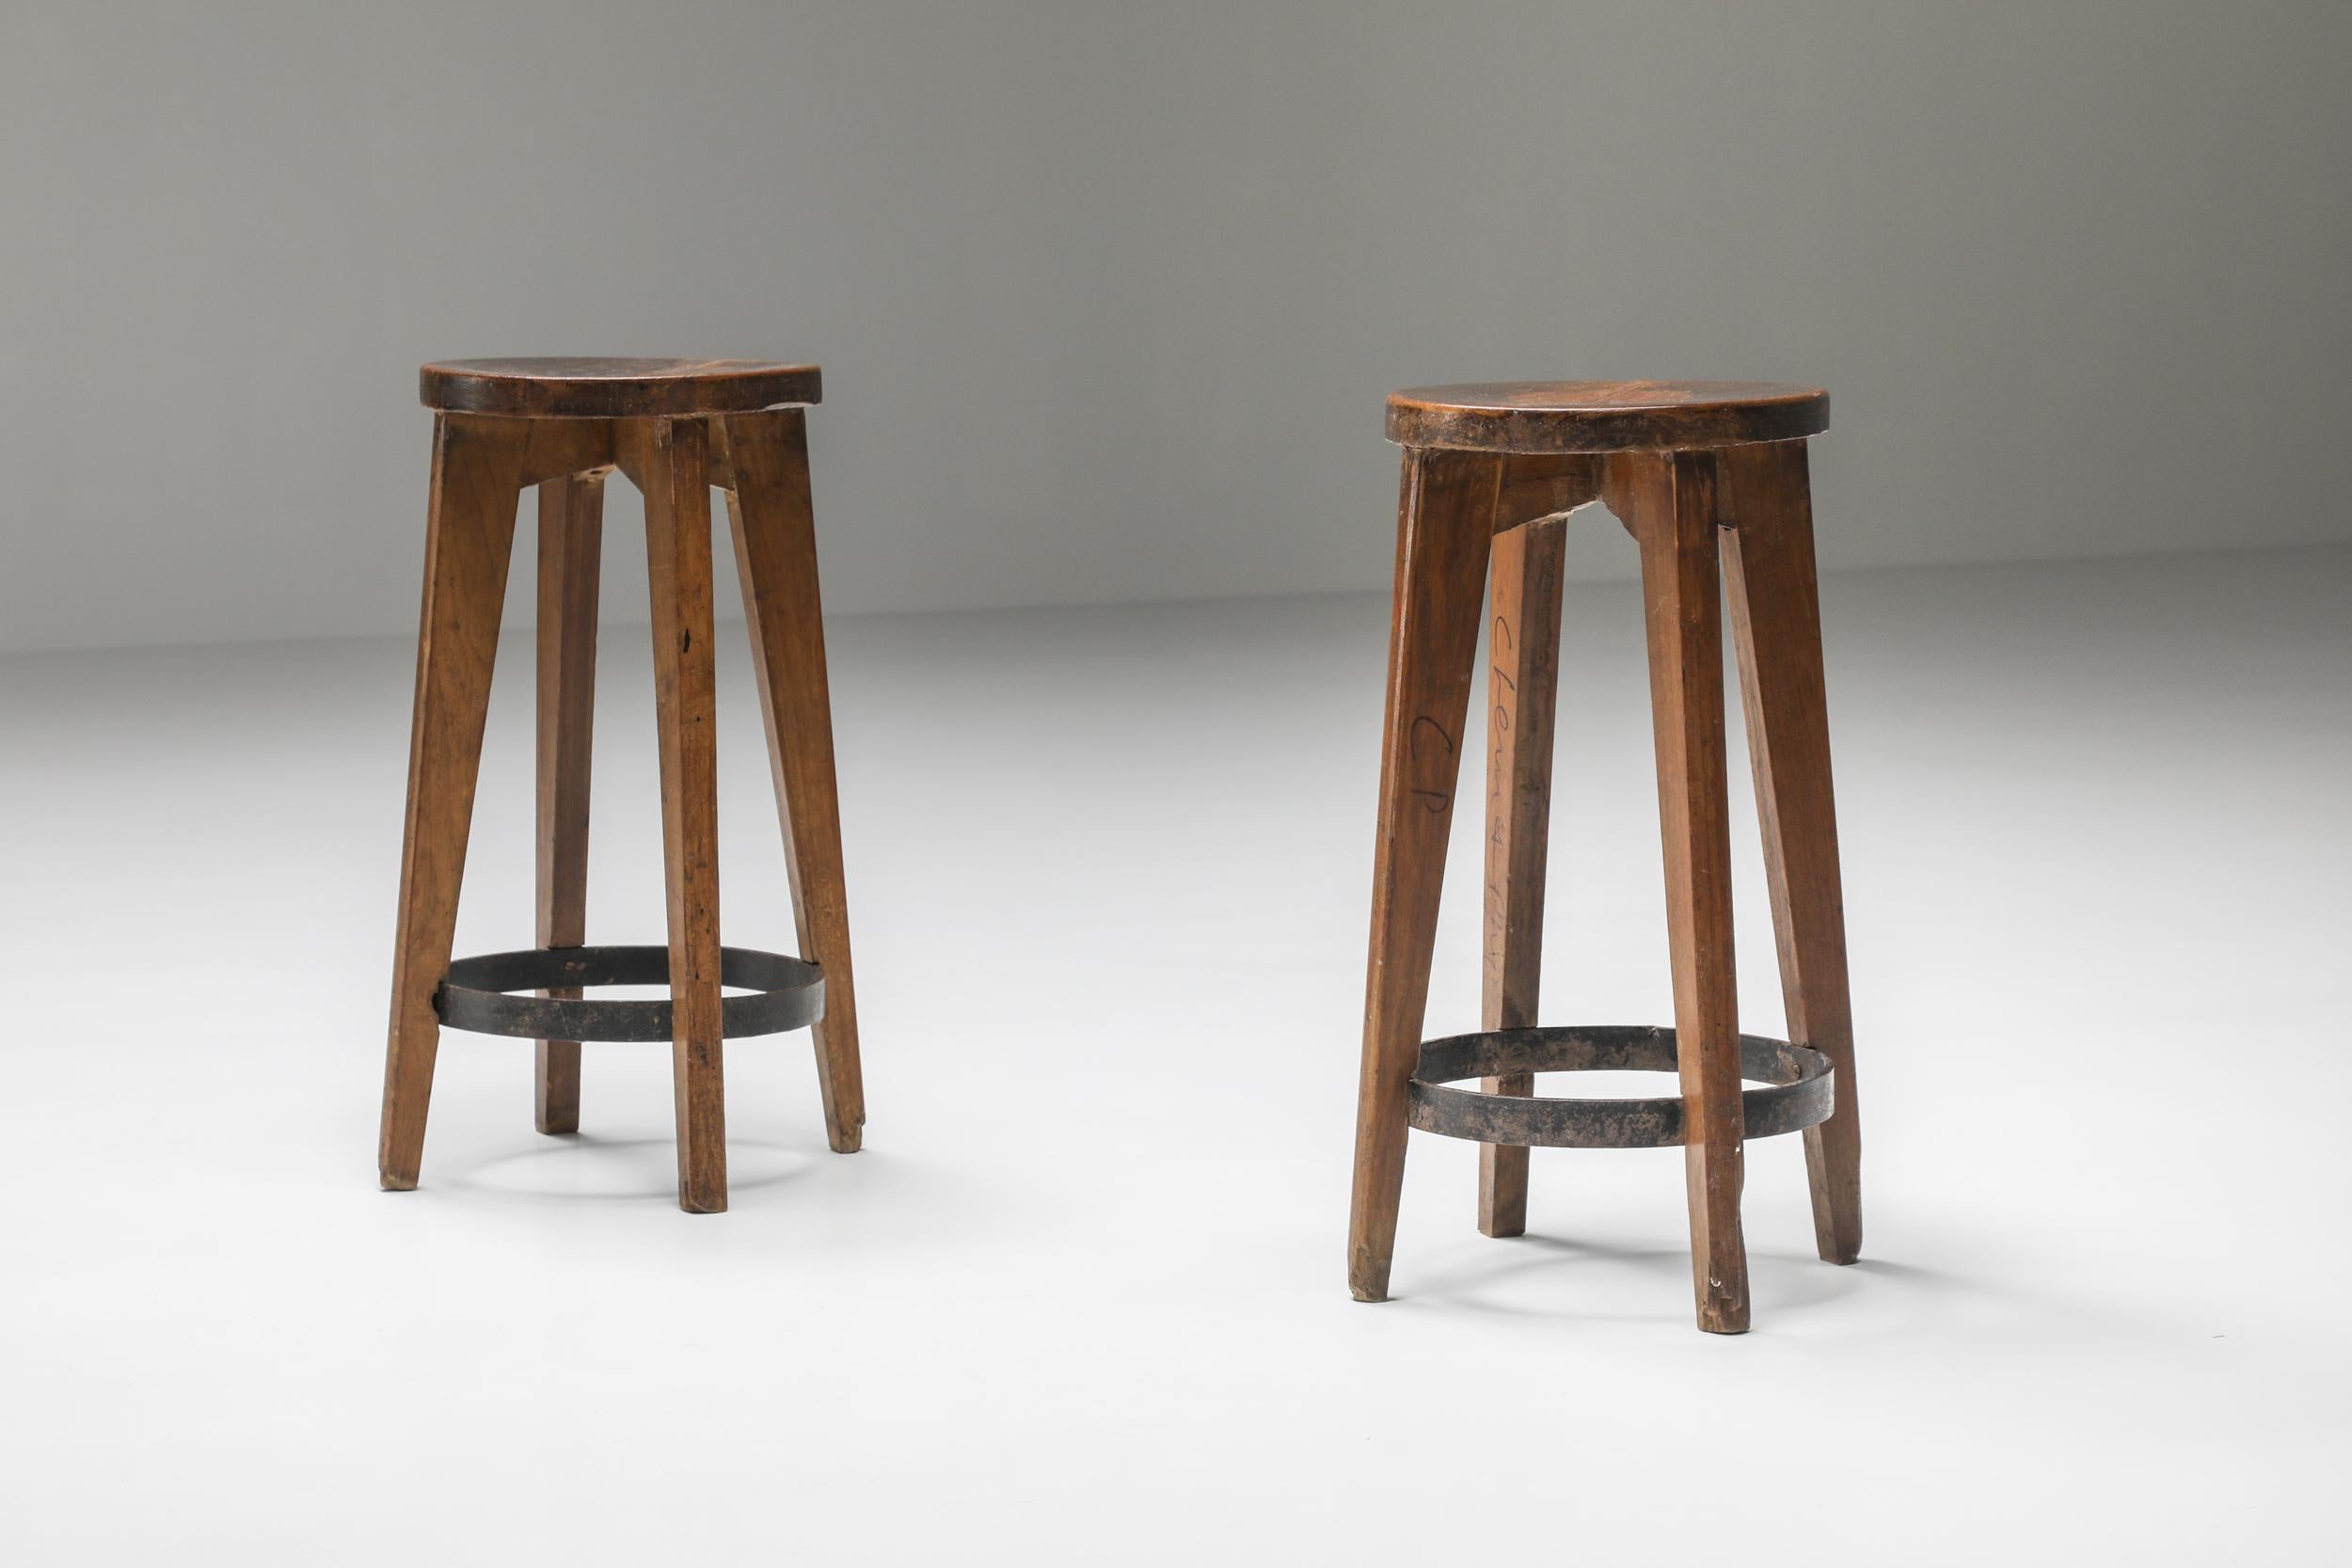 Indian Pierre Jeanneret Stools 1965-1967, Authentic Mid-Century Modern Chandigarh